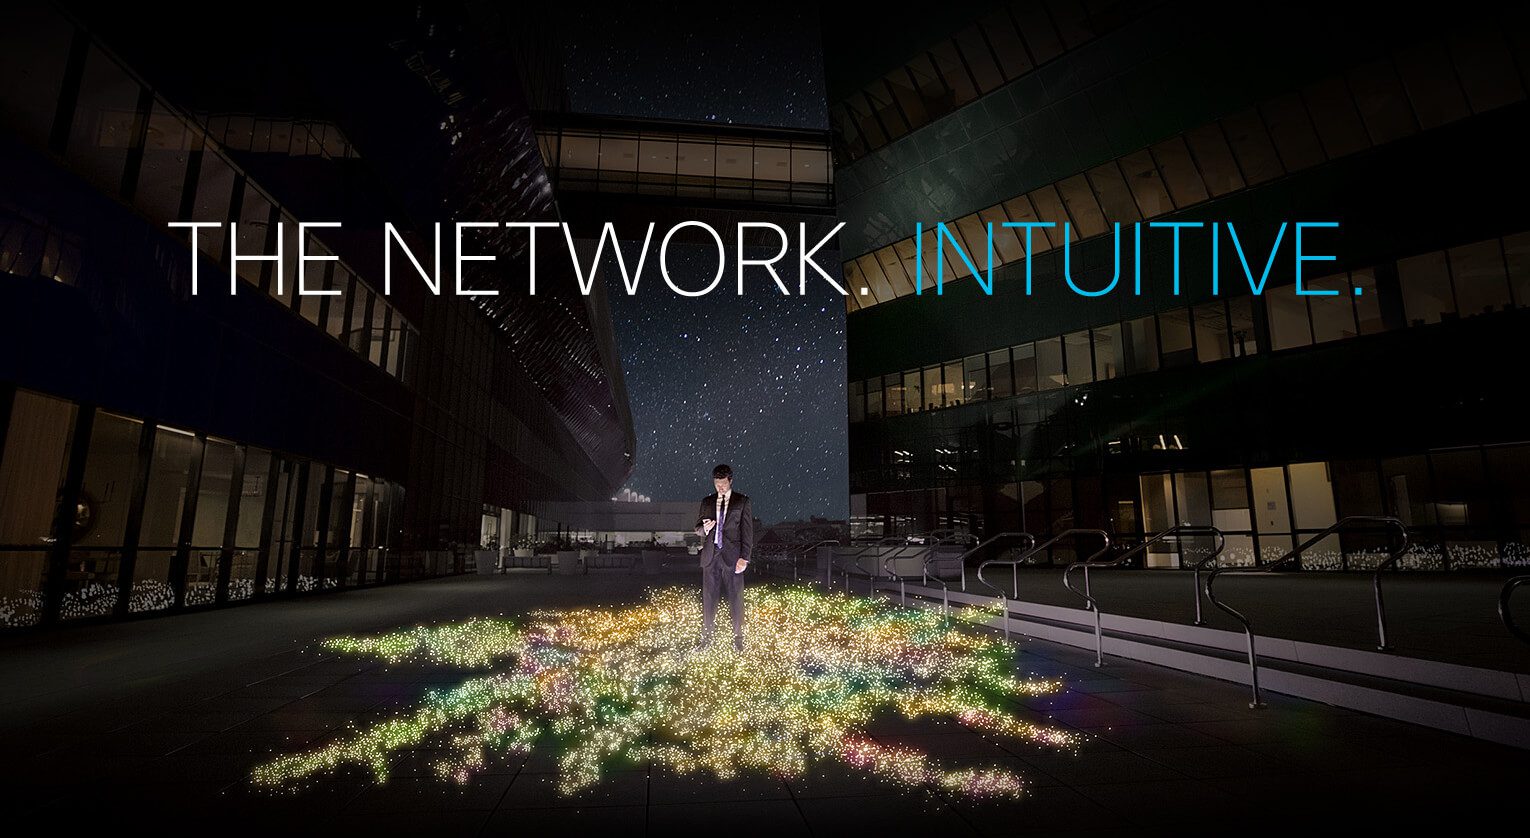 The Network. Intuitive.